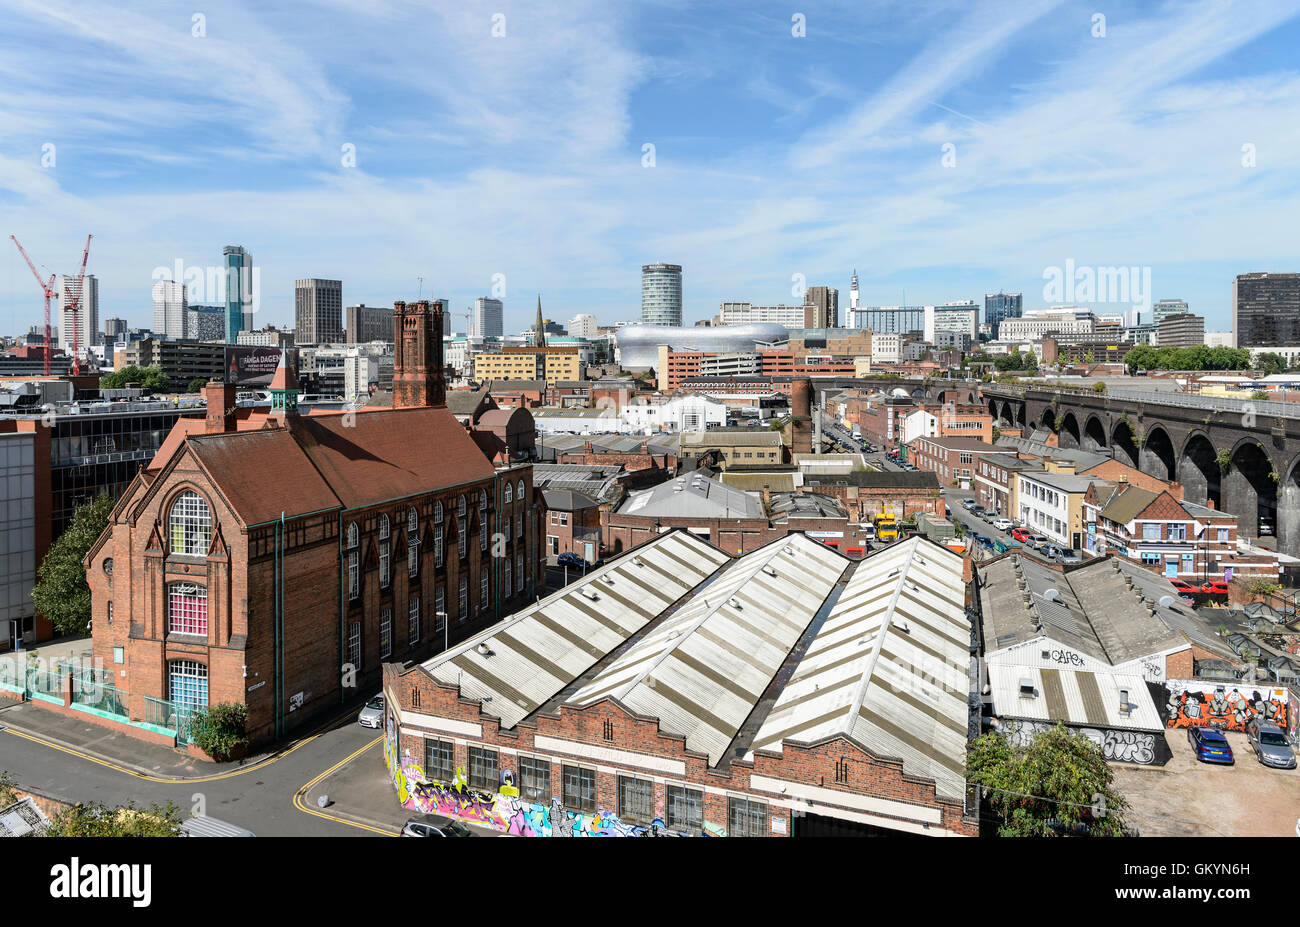 View towards Birmingham City centre (including the Bullring, the Rotunda) and the Telecom Tower) from the Digbeth area of the City. Stock Photo